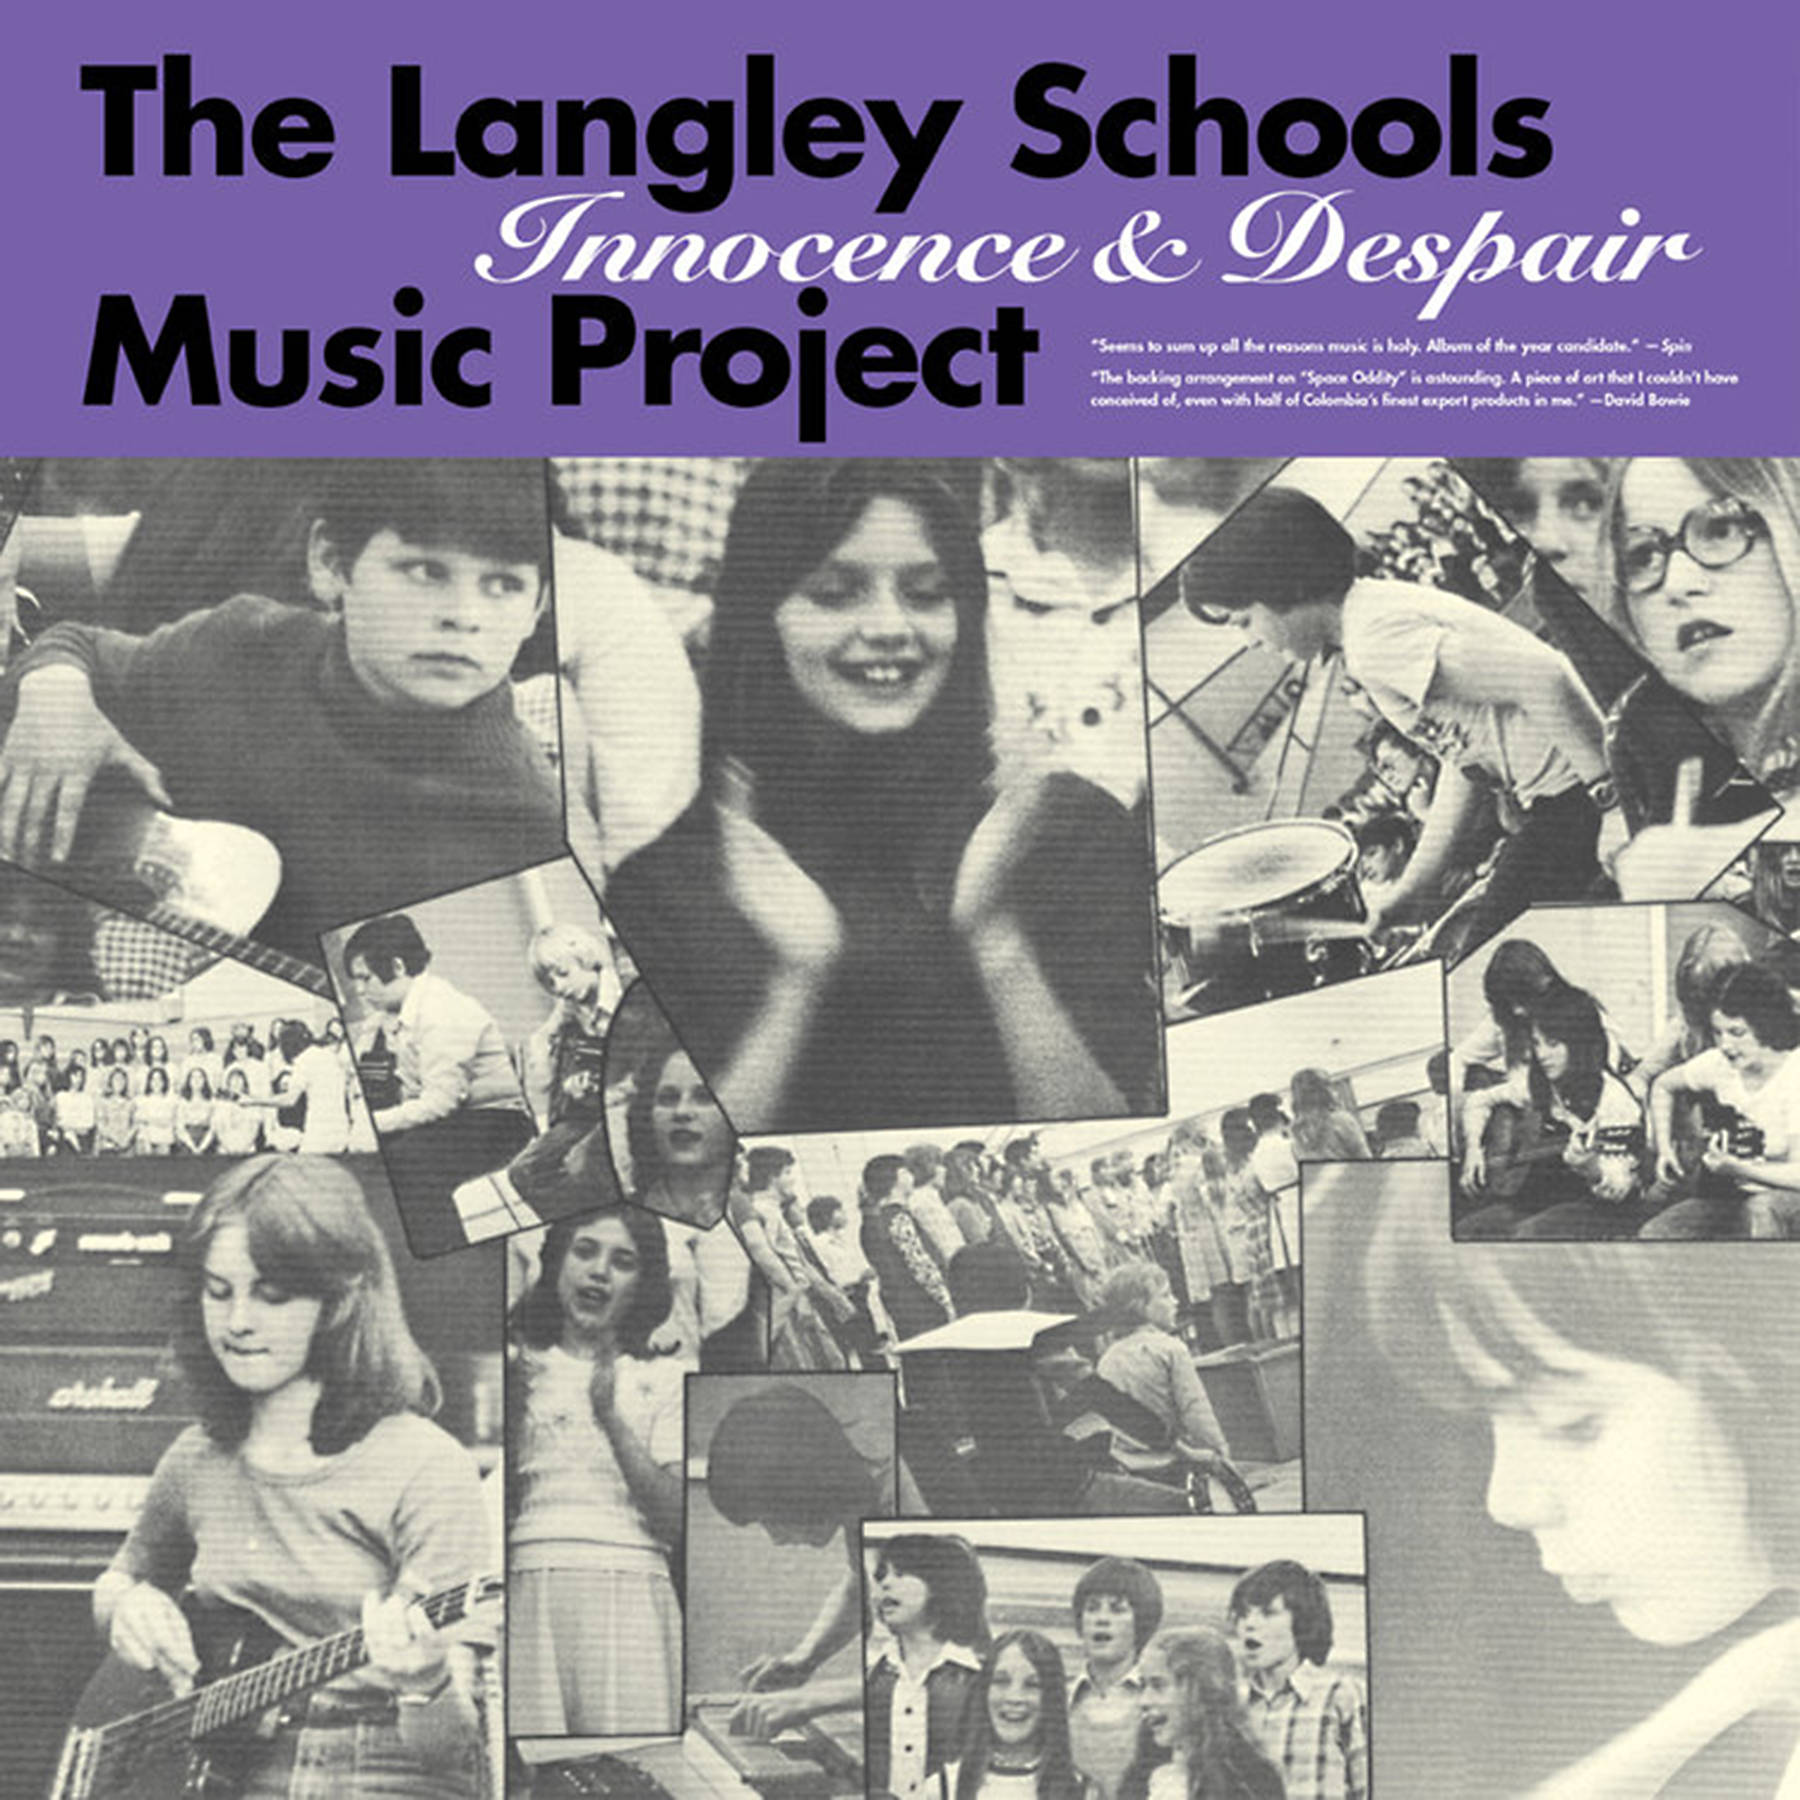 14175962_web1_181029-LAT-langley-music-project-album-cover